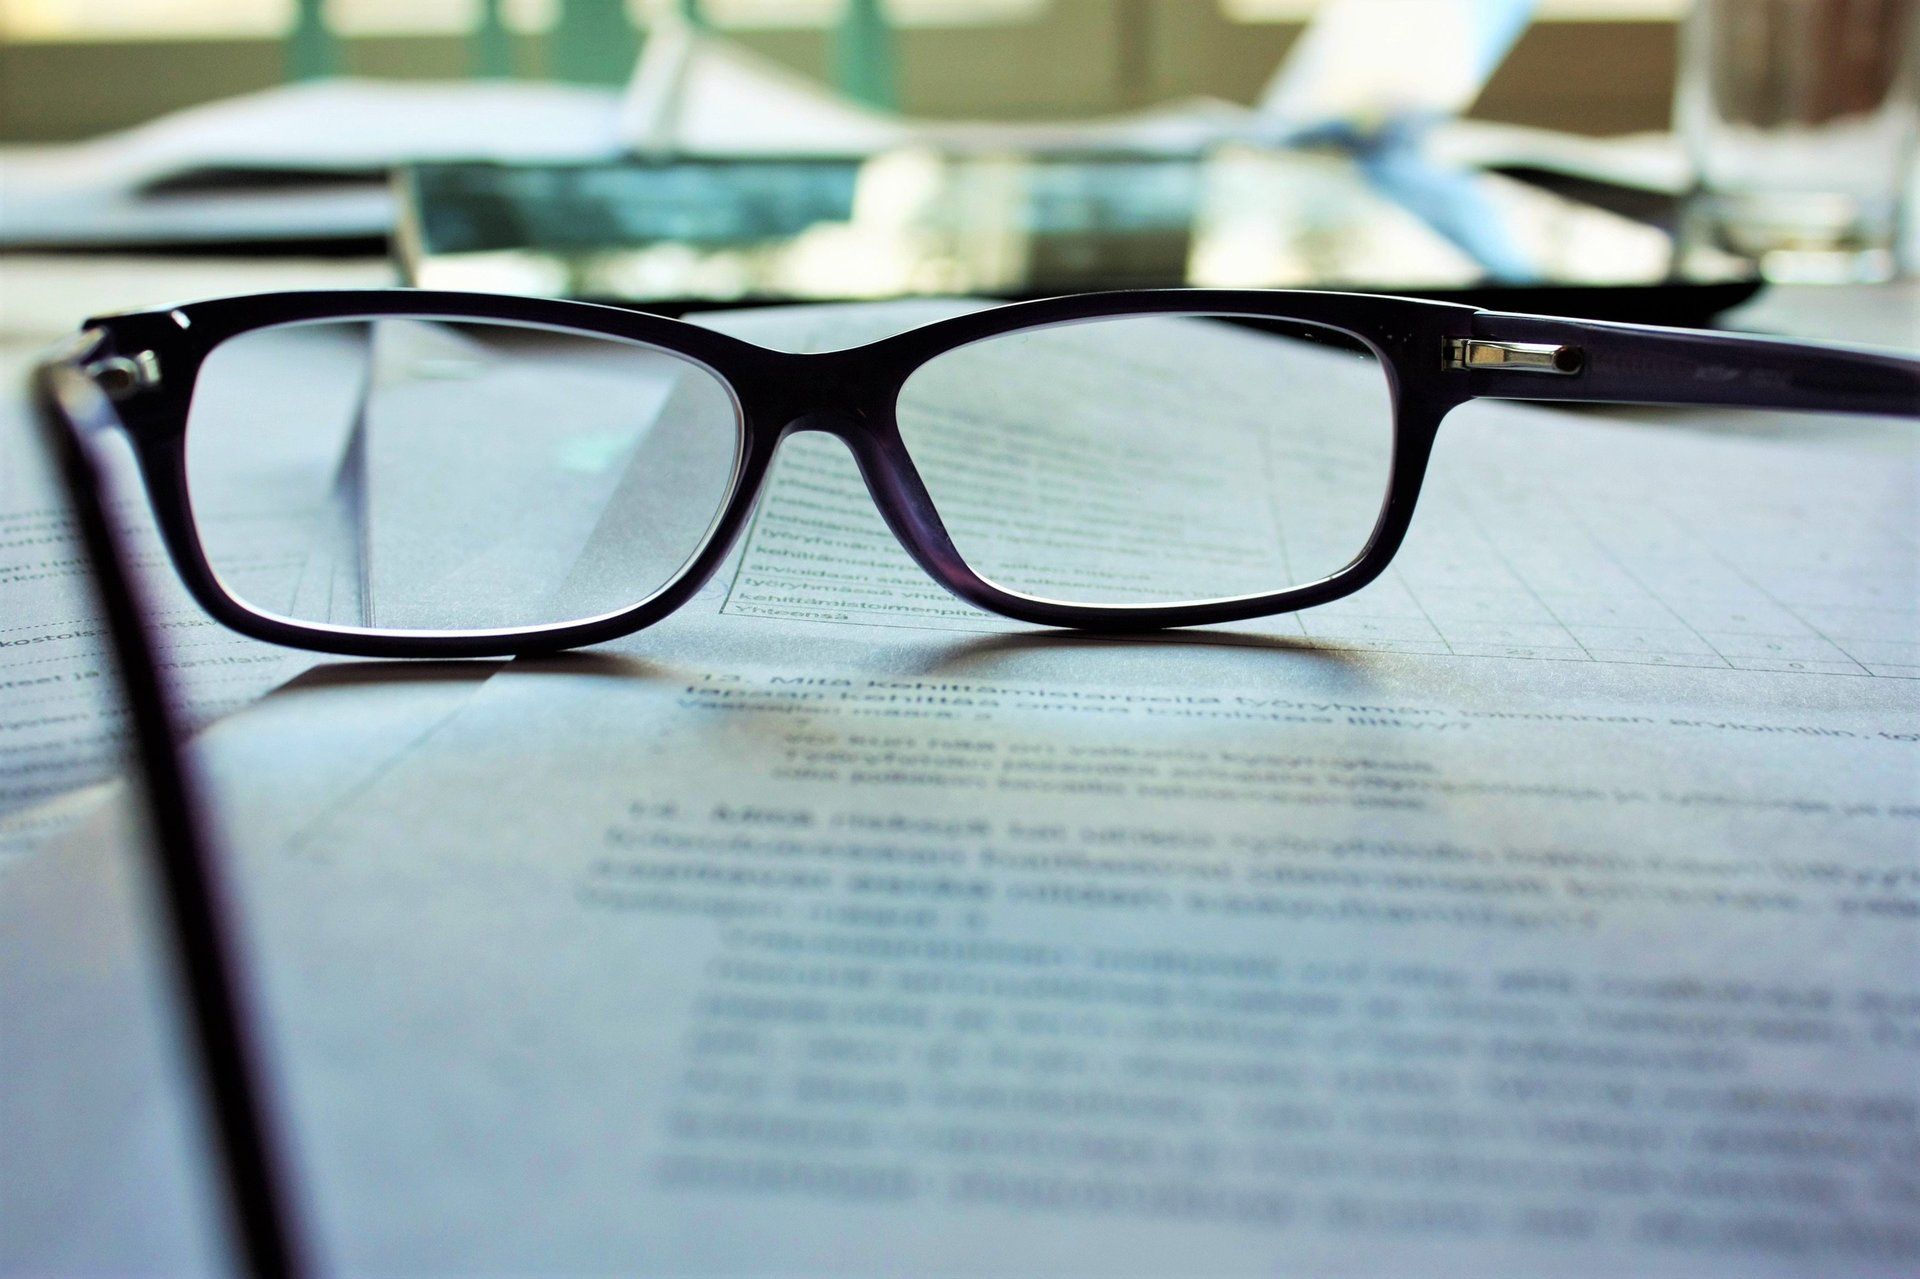 Glasses on a contract page sitting on a table